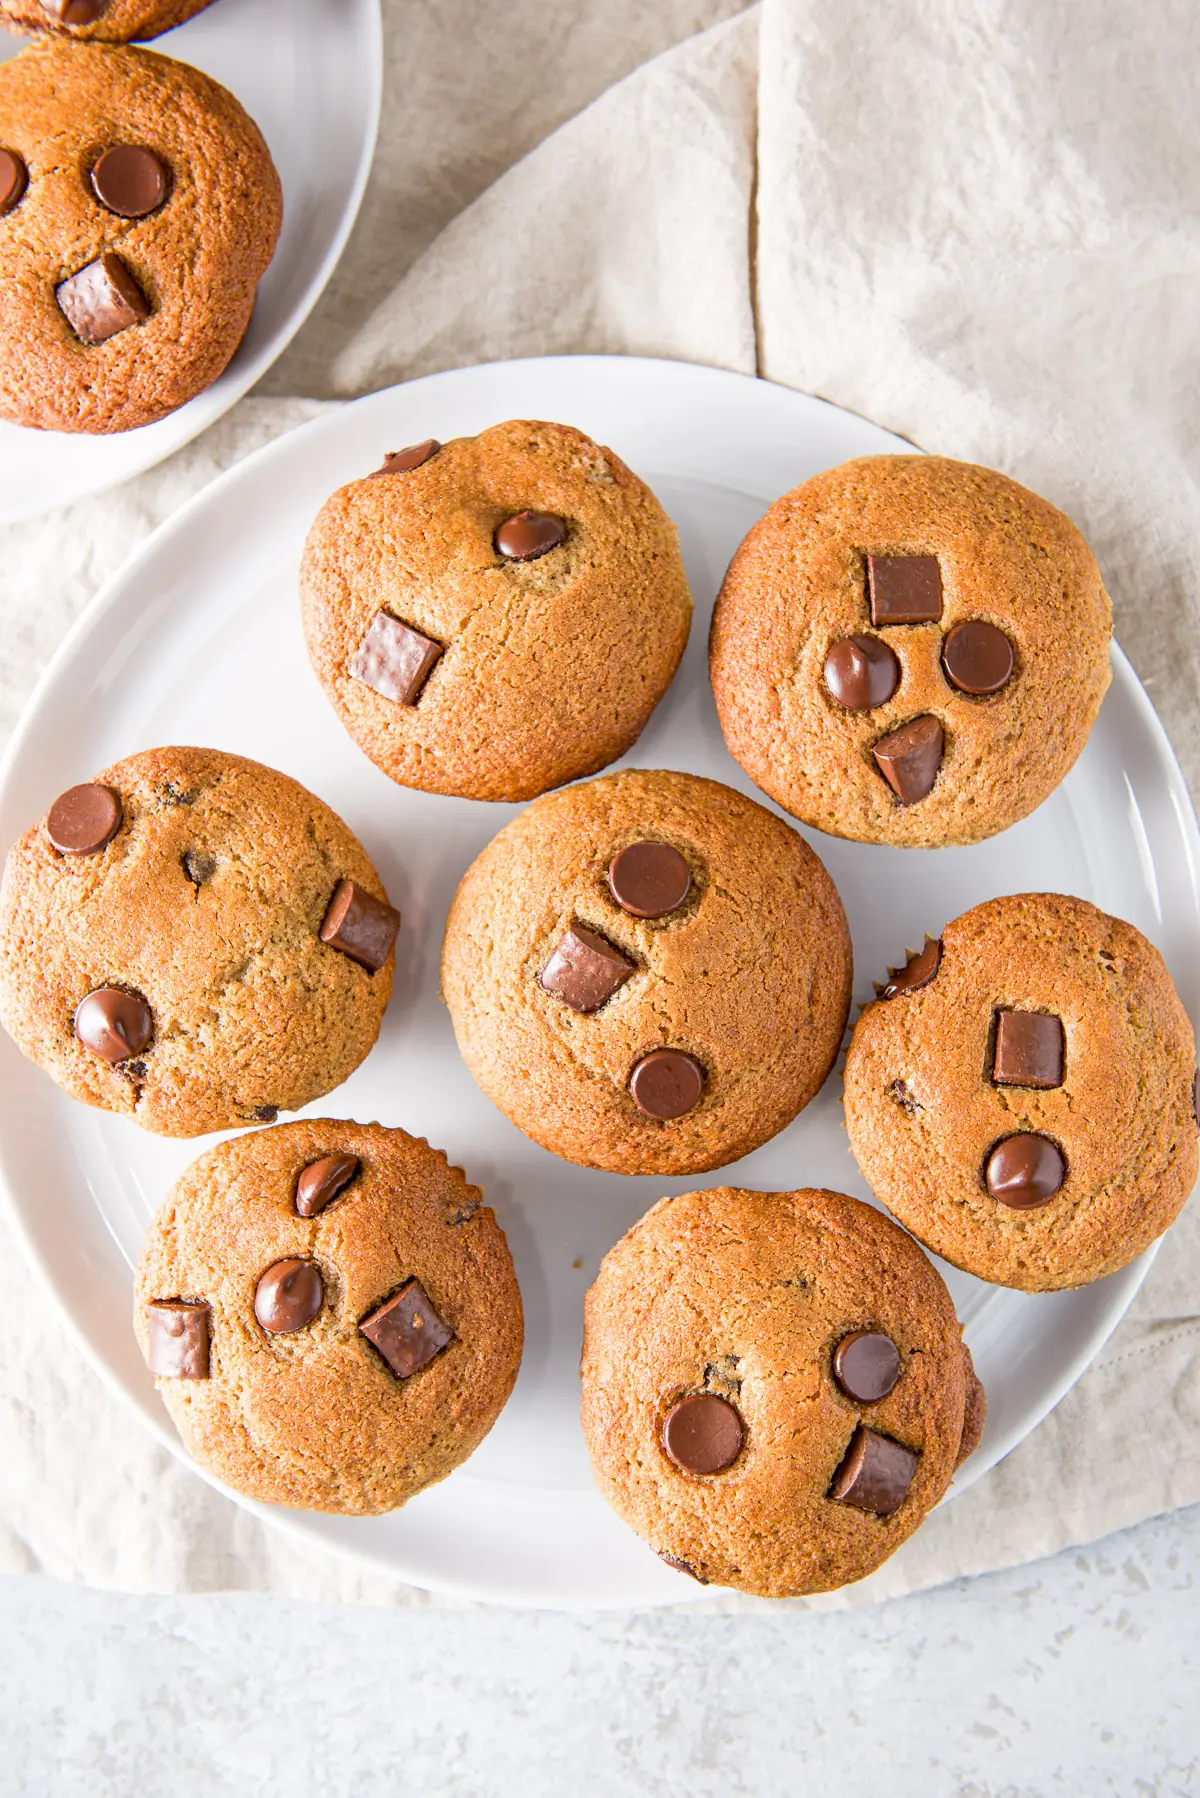 Overhead view of chocolate chip muffins on a plate